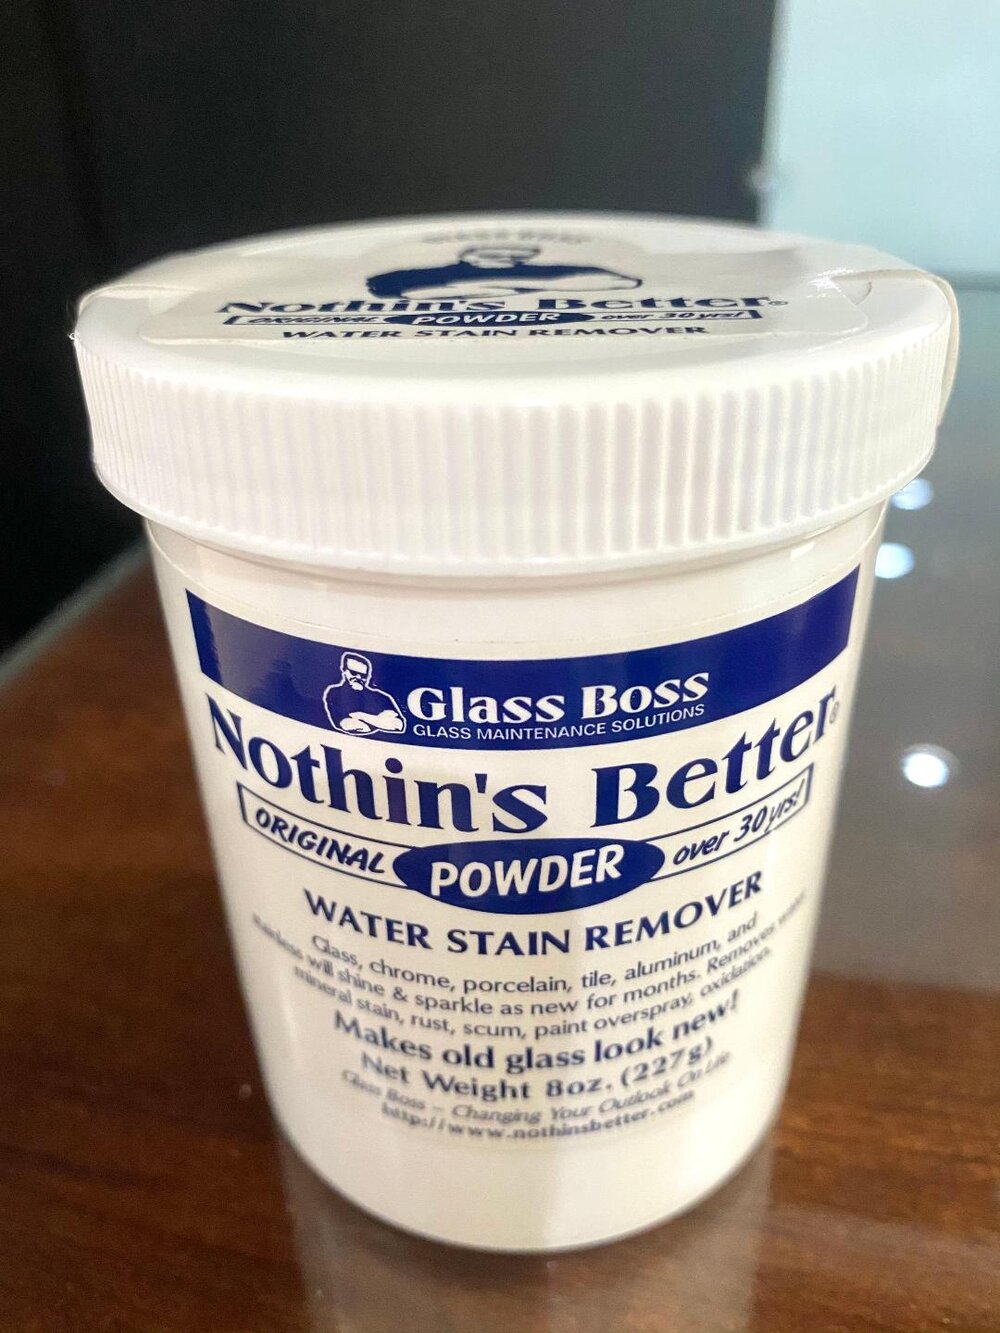 8oz Glass Boss Nothin's Better Original Water Stain Remover Powder